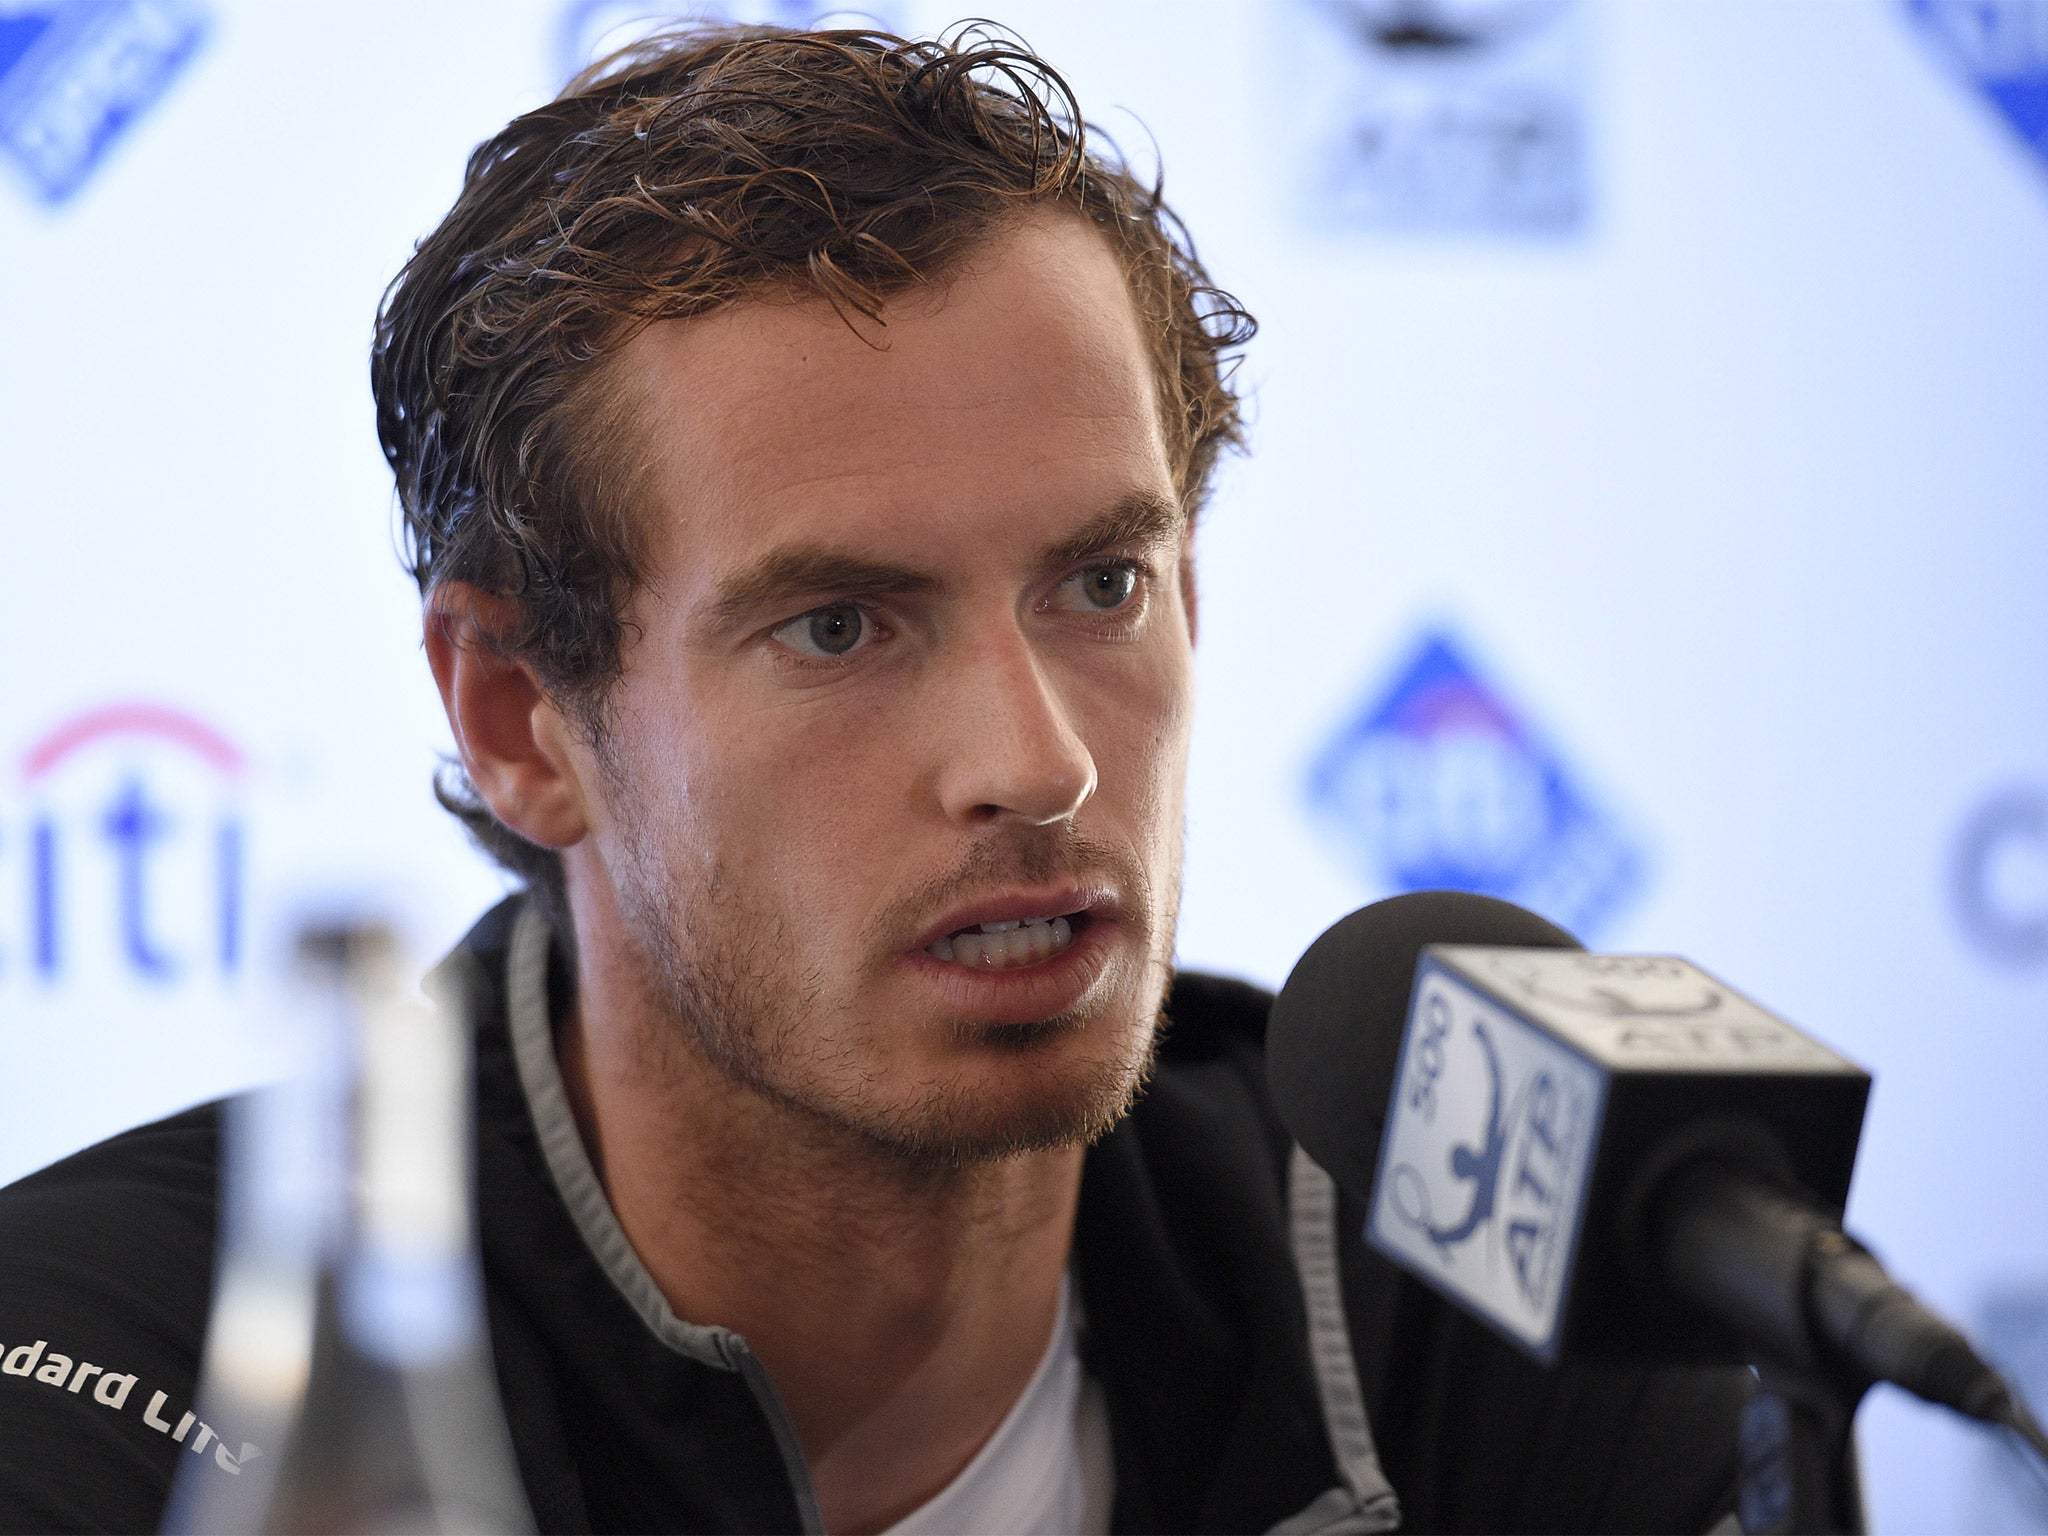 Andy Murray speaks to media ahead of the Citi Open in Washington